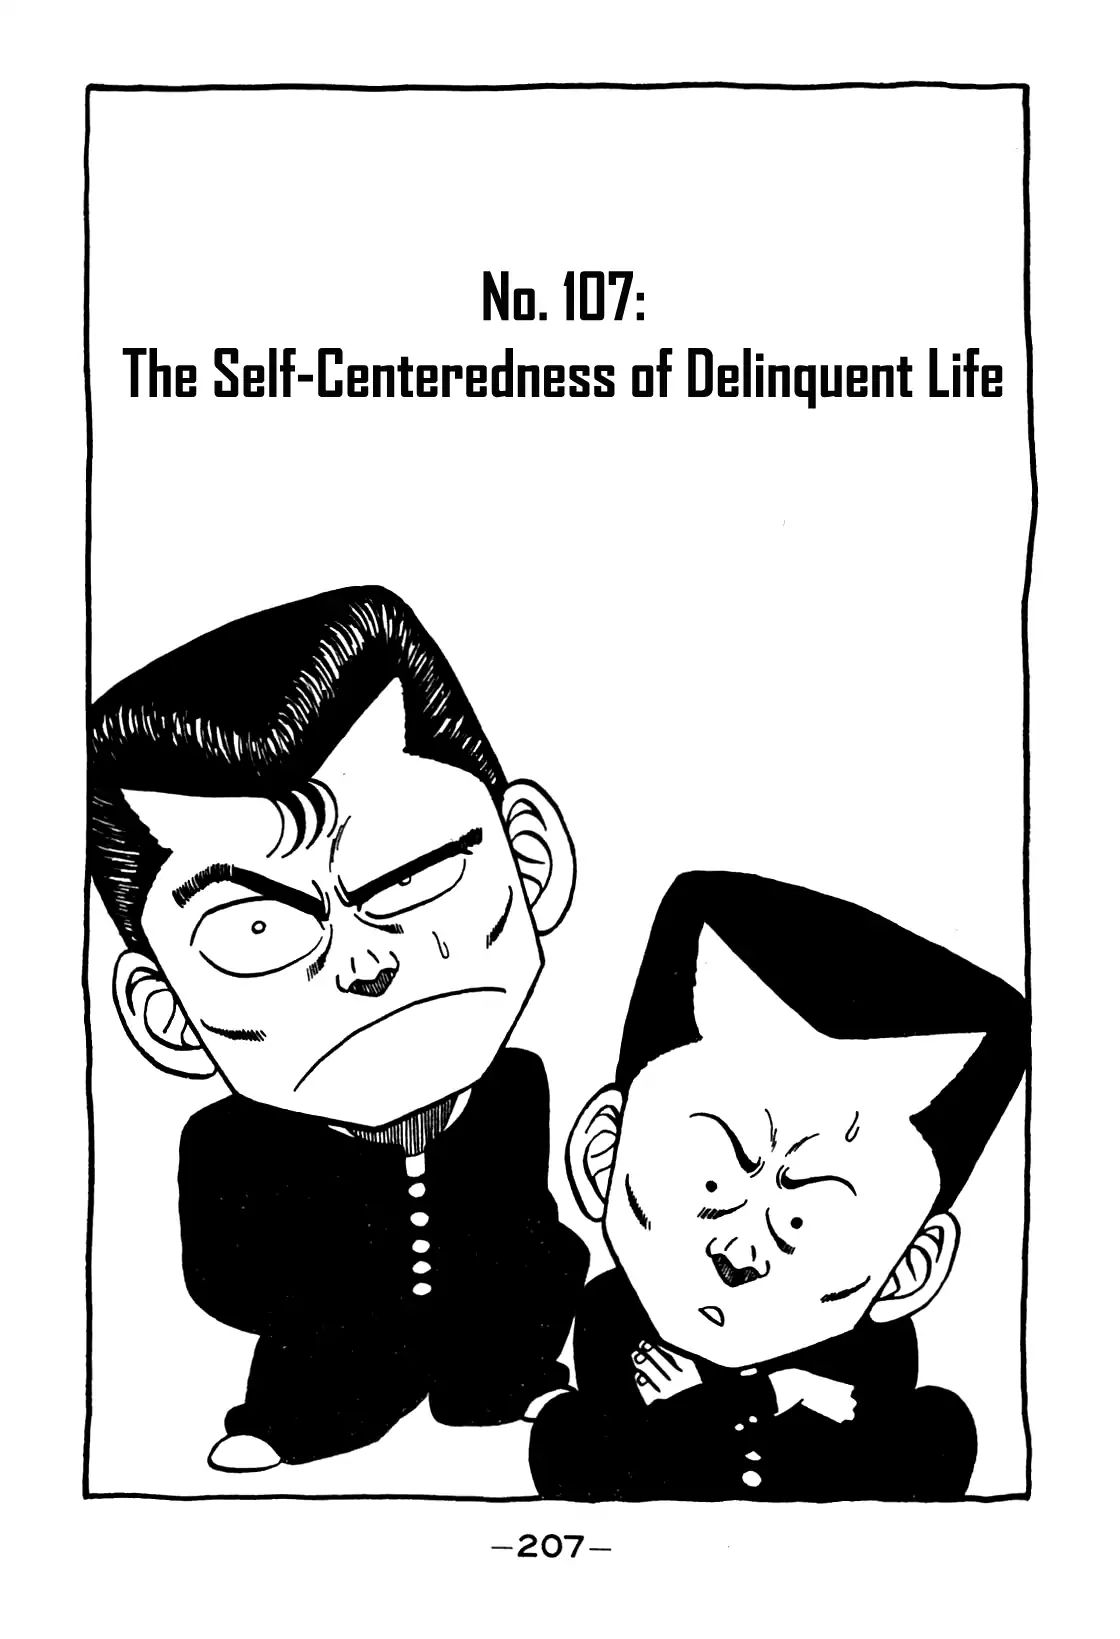 Be-Bop-Highschool Vol.12 Chapter 107: The Self-Centeredness of Delinquent Life